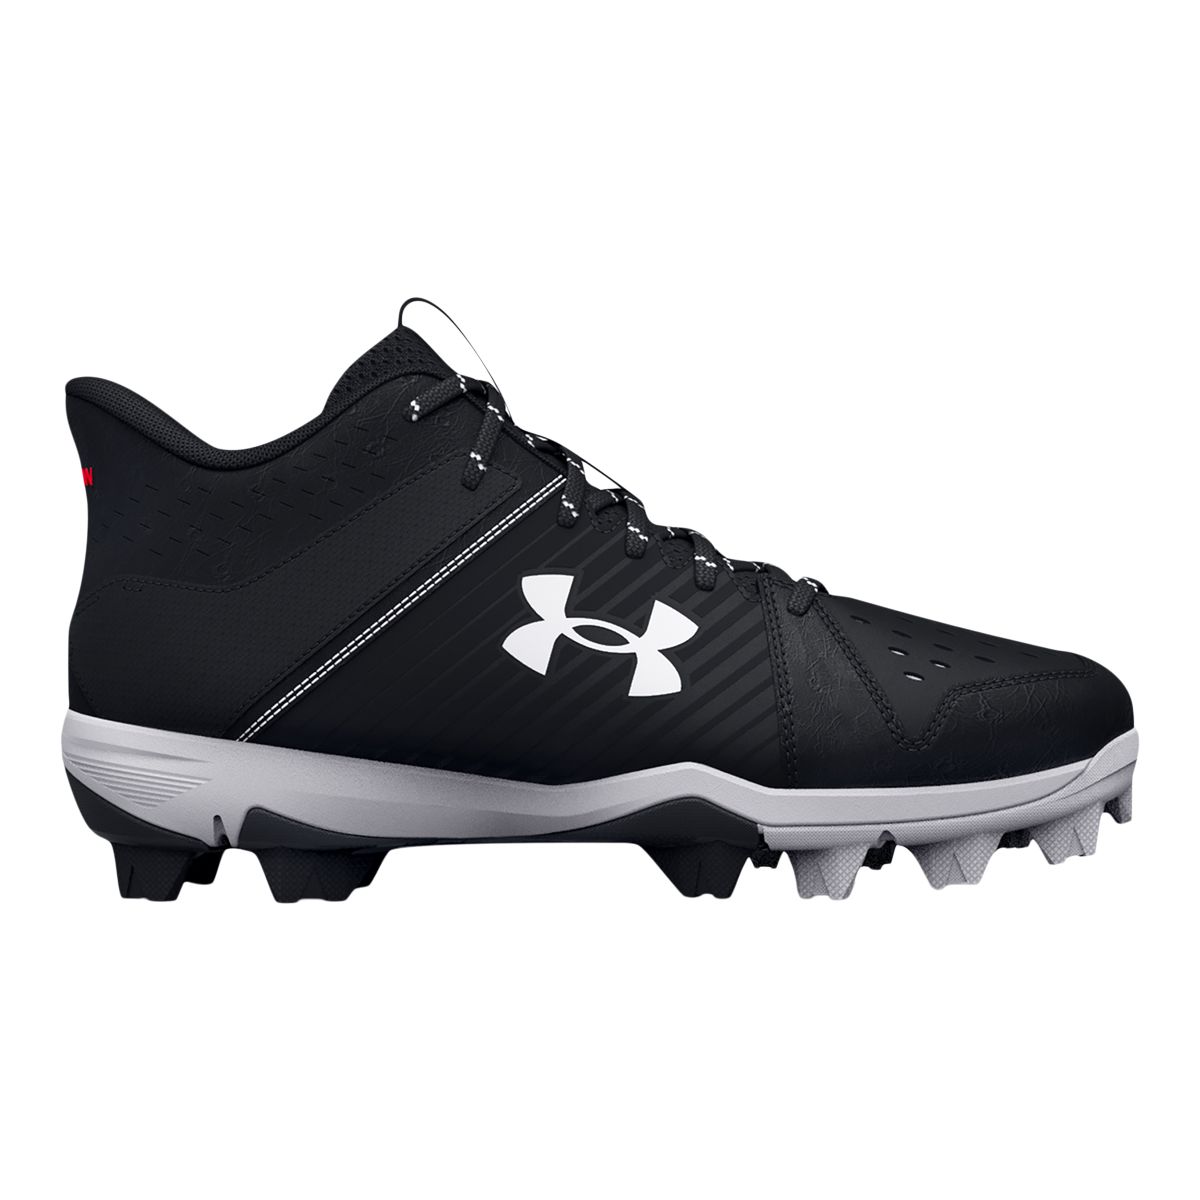 Image of Under Armour Kids' Leadoff 23 RM Mid Baseball Cleats